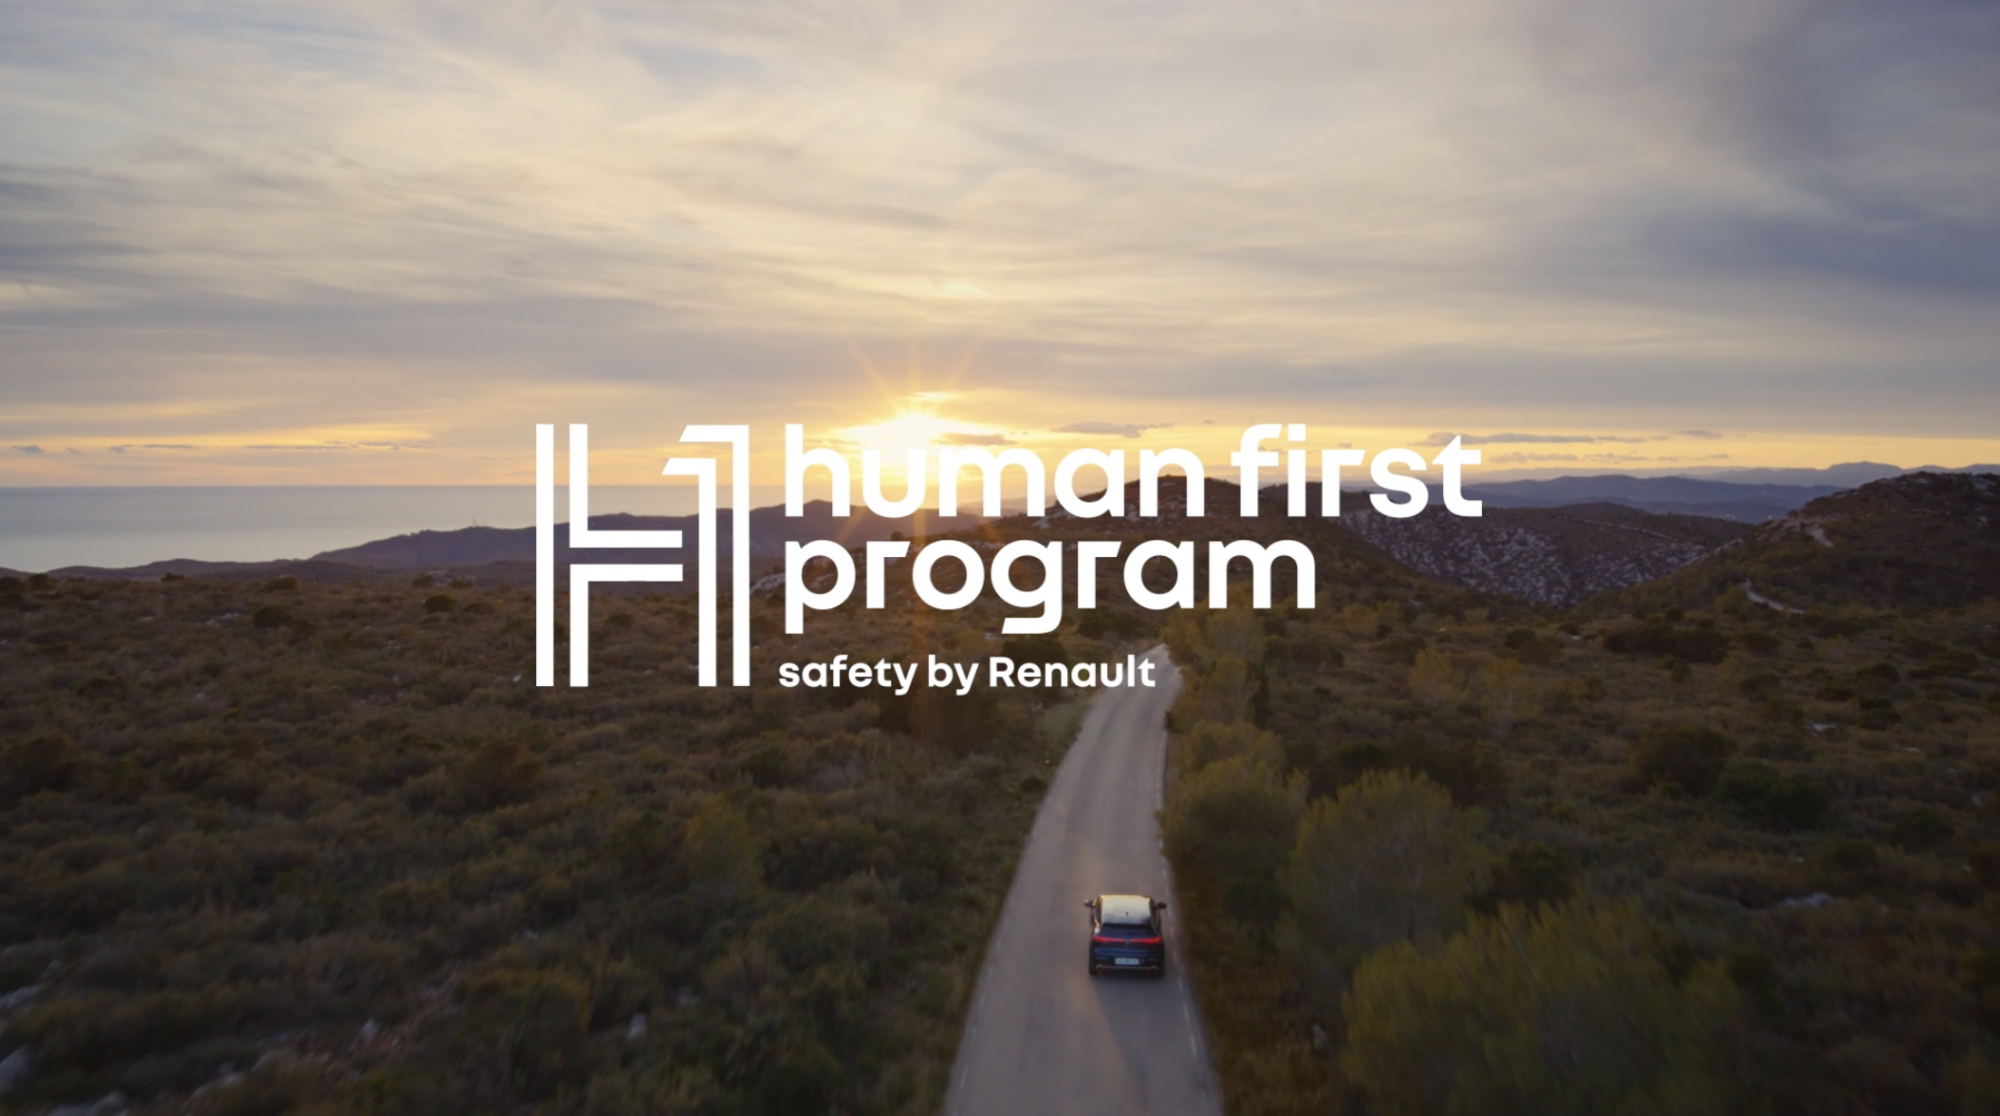 Human first program : safety by Renault